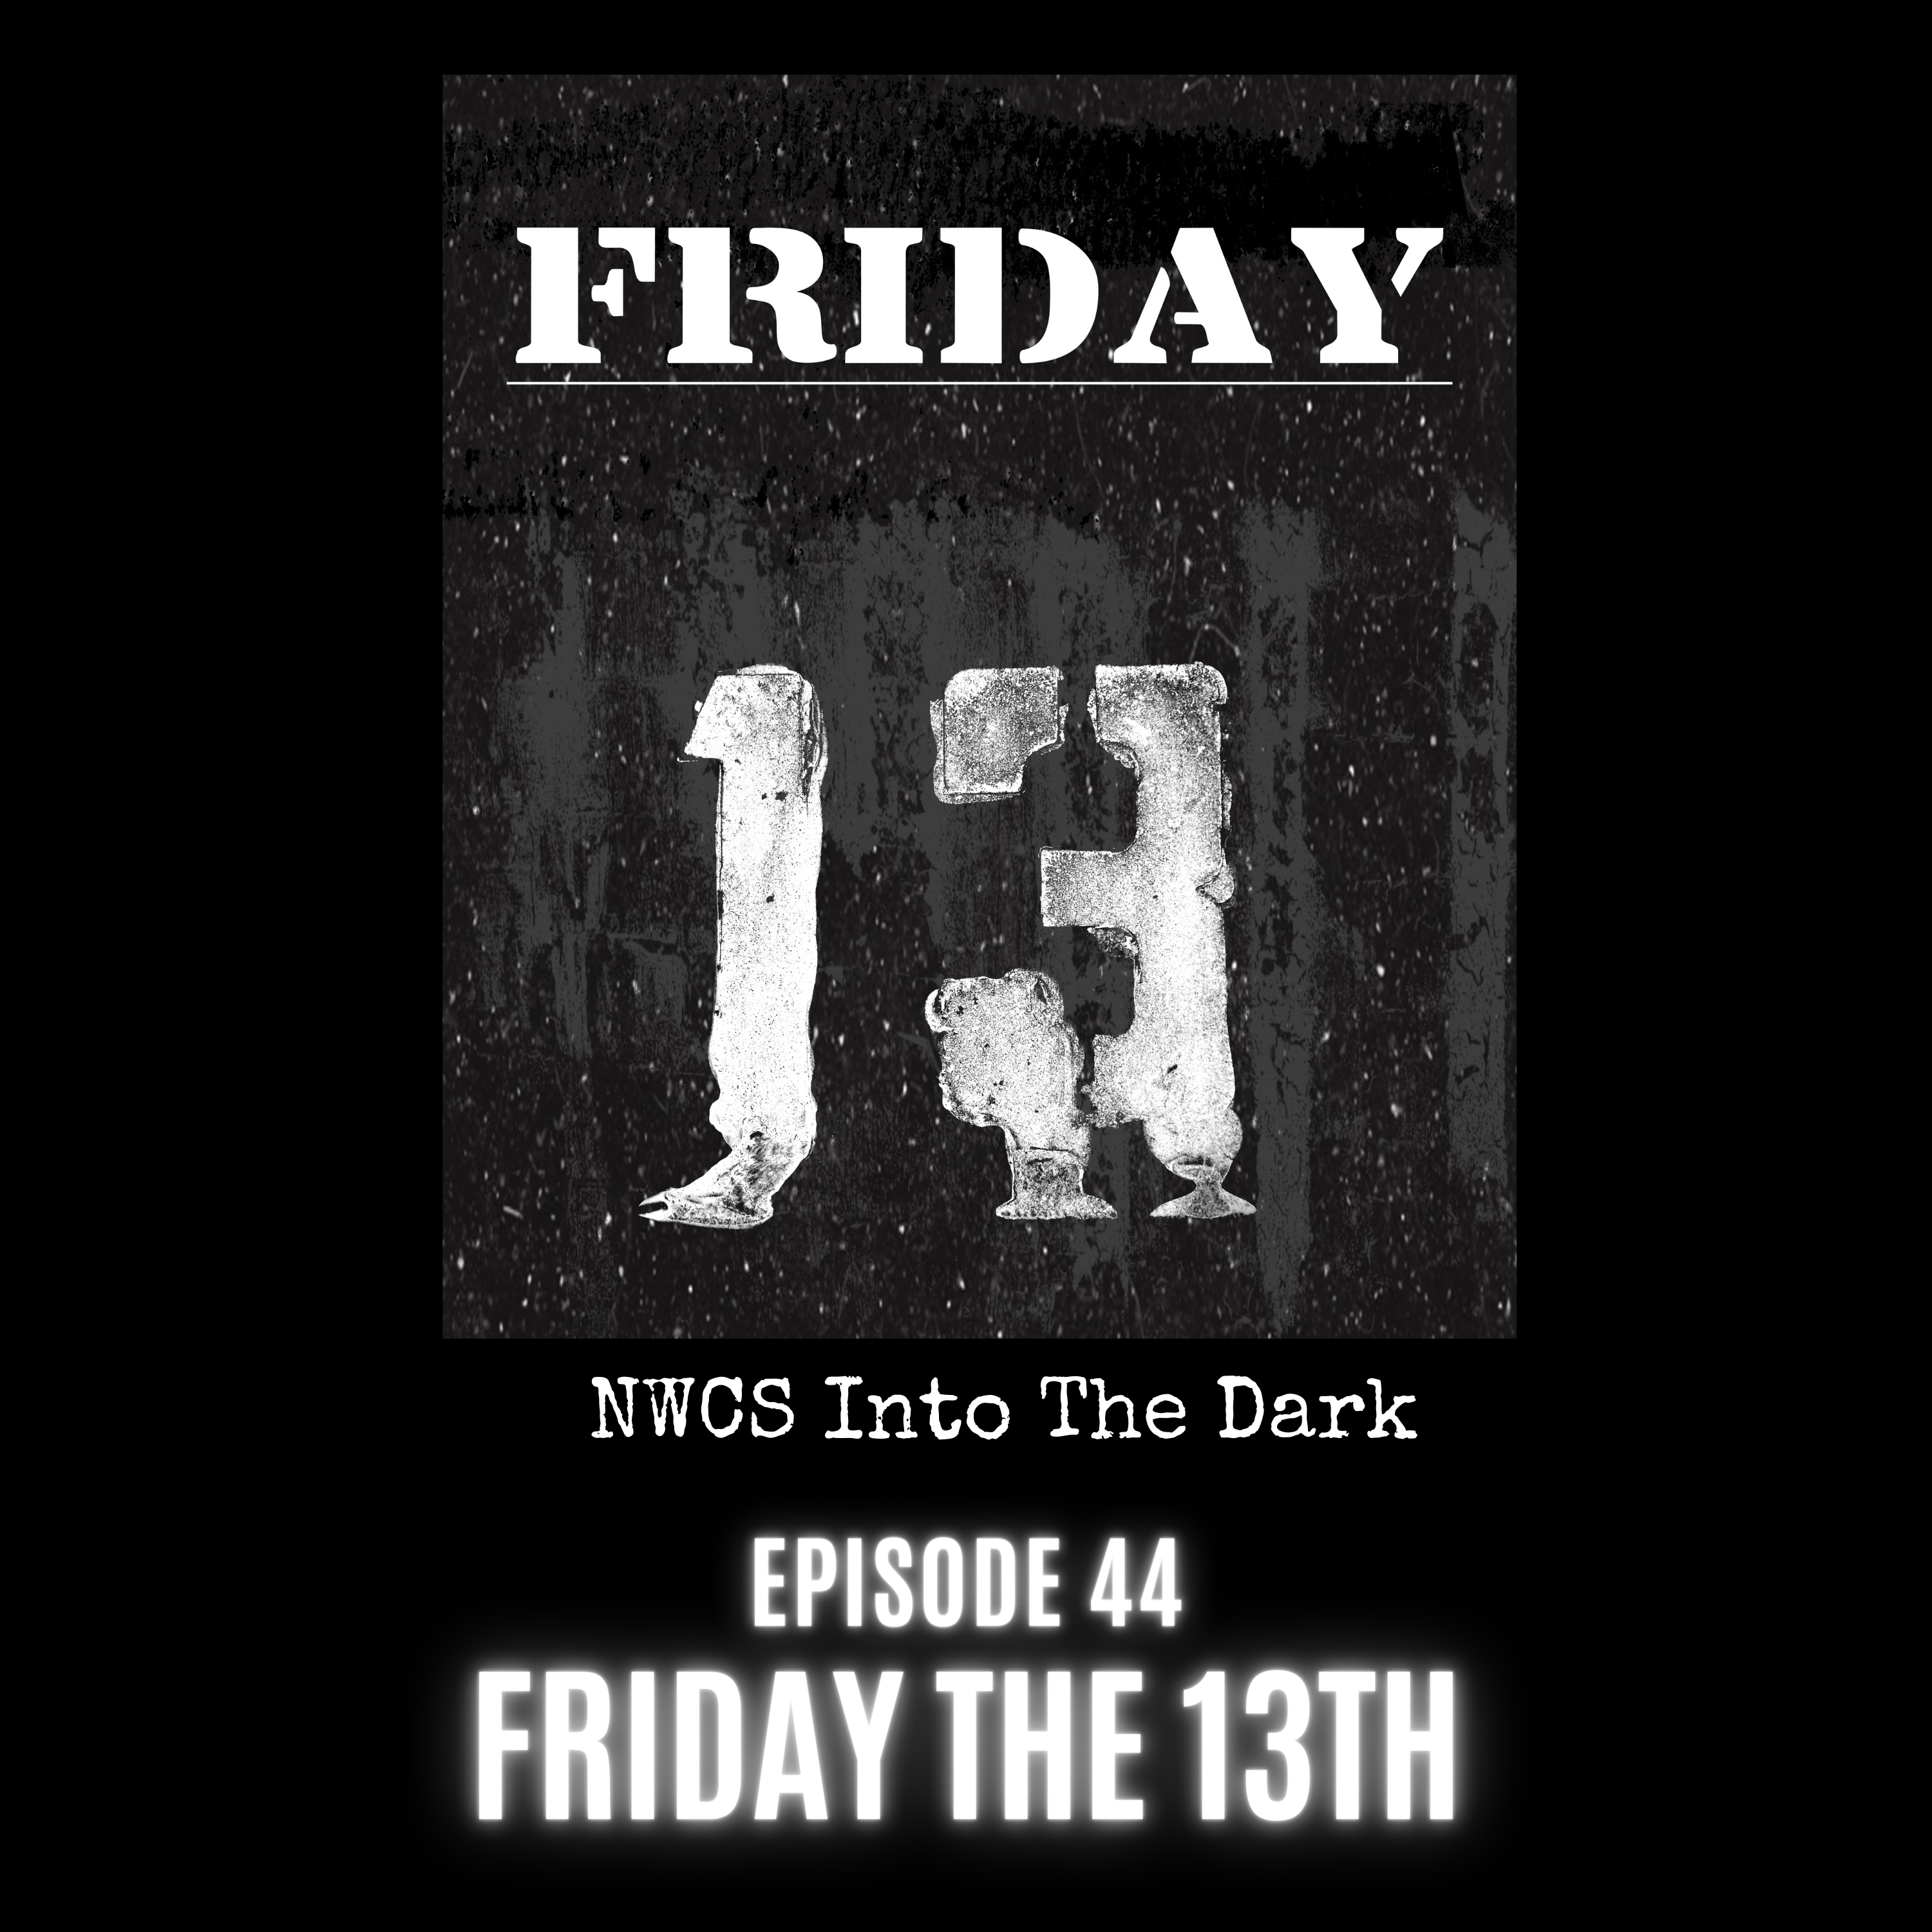 NWCS Into The Dark Episode 44 Friday the 13th